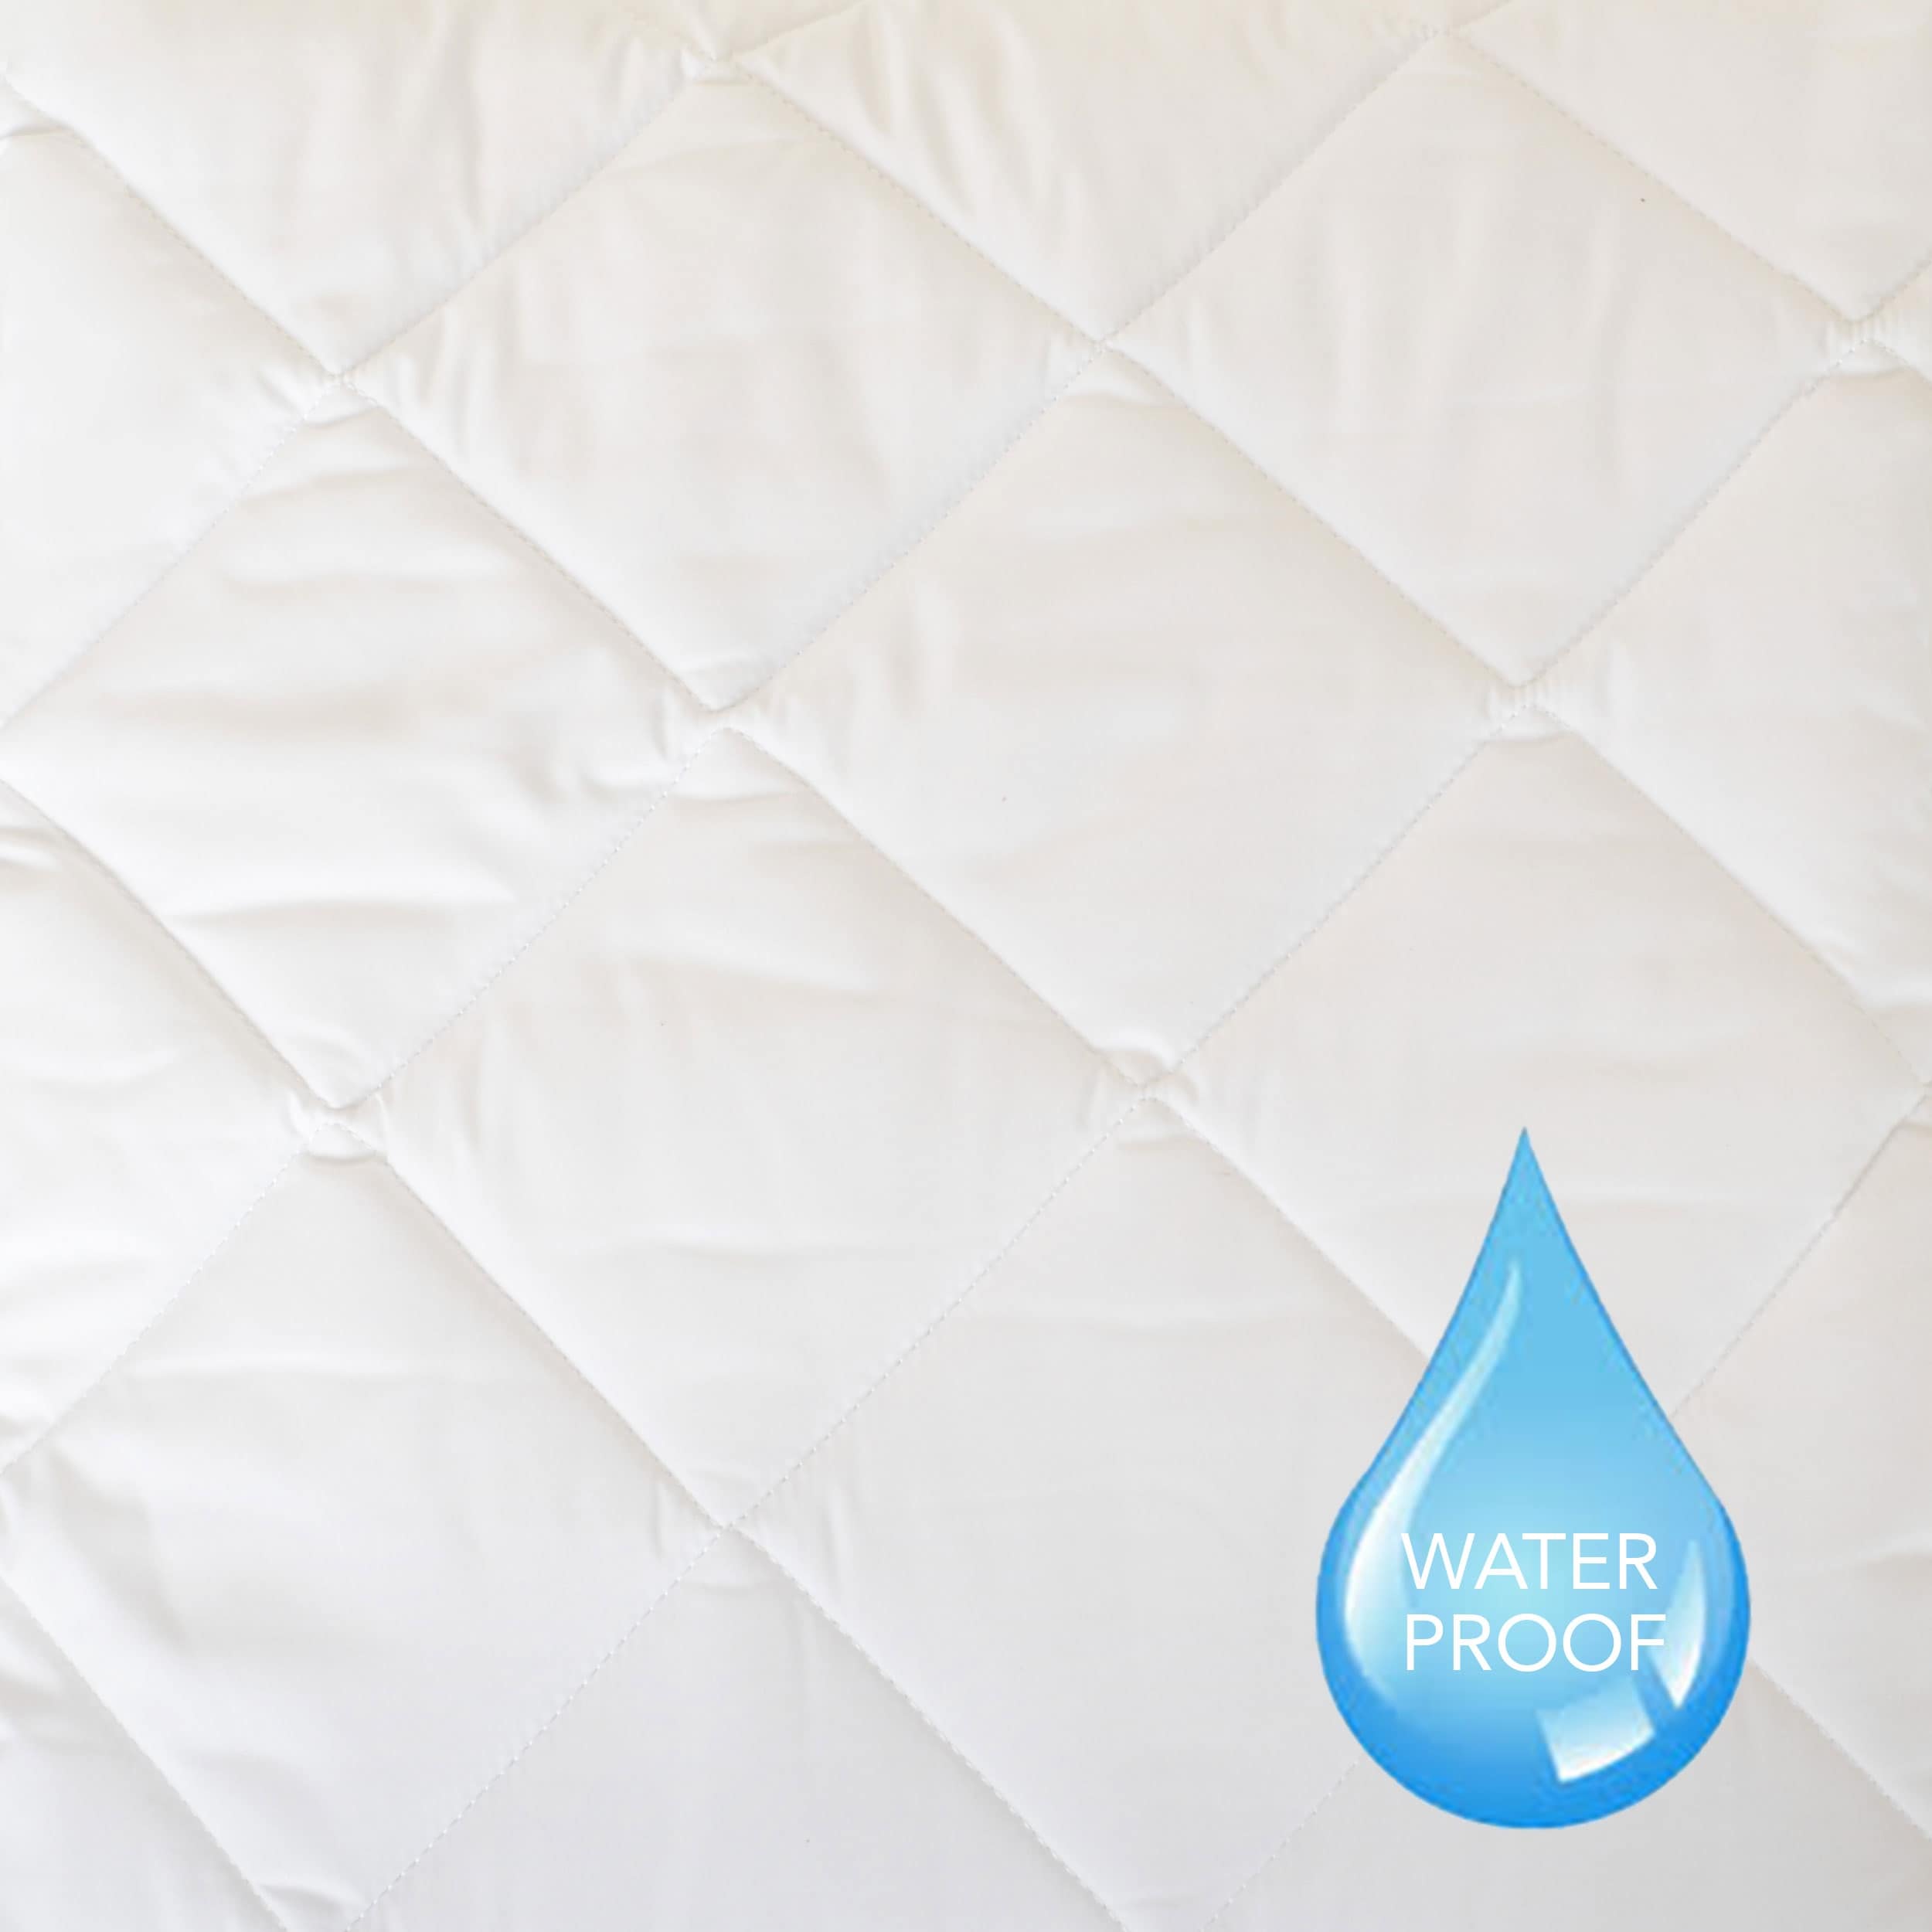 Back to Campus Twin XL Dorm Microfiber Waterproof Mattress Pad Protector - White